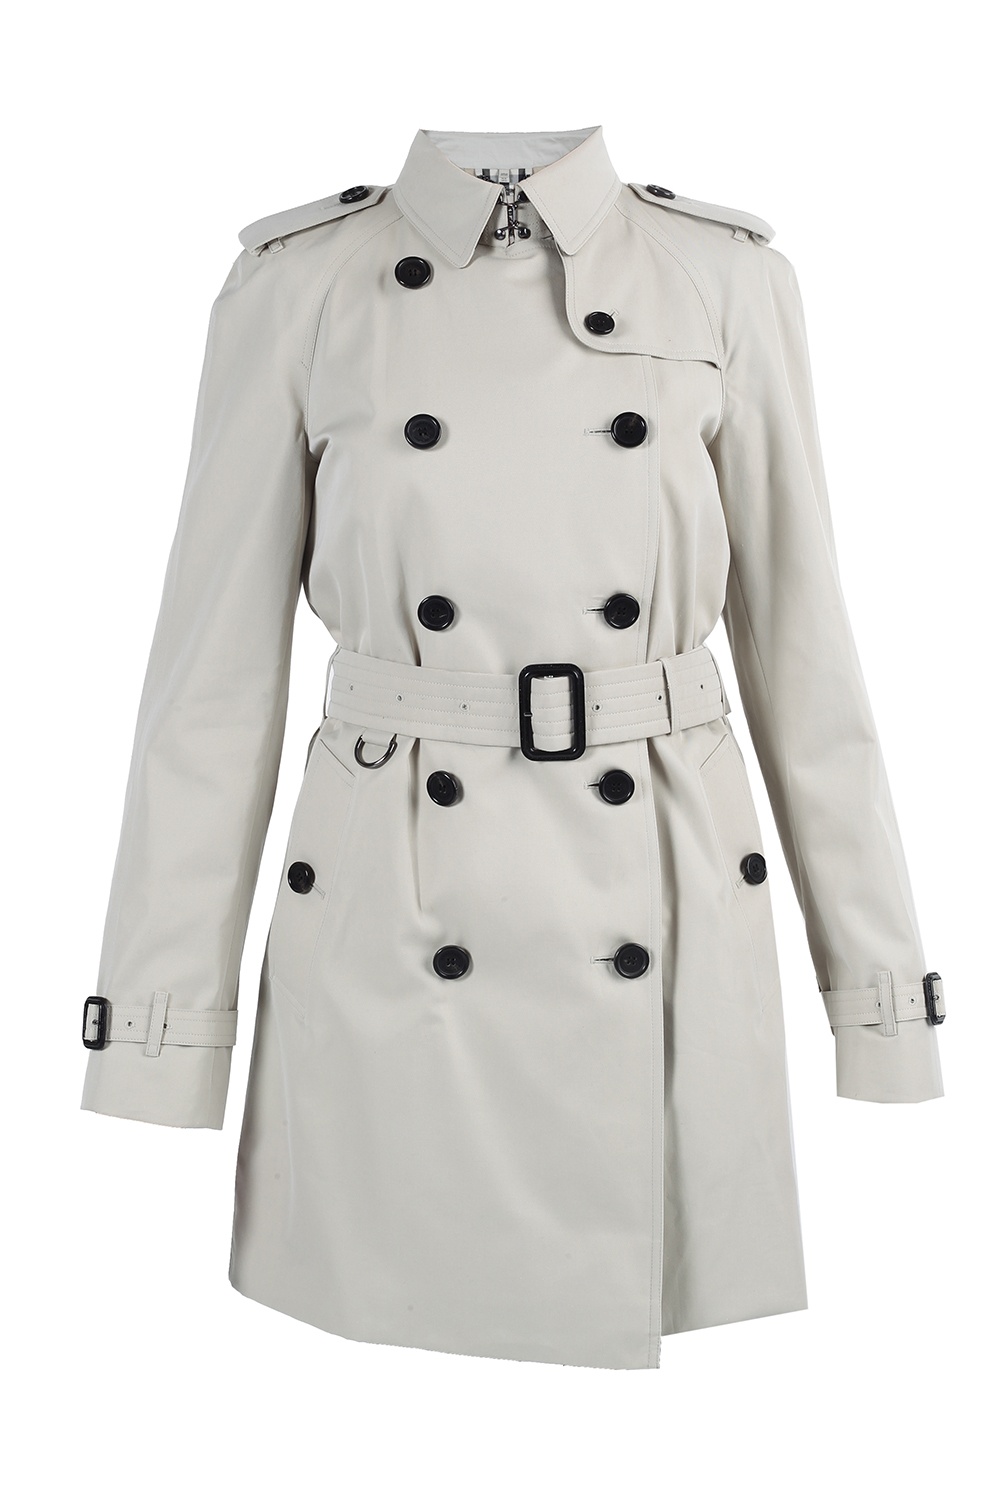 Burberry 'The Westminster' Trench Coat | Women's Clothing | Vitkac